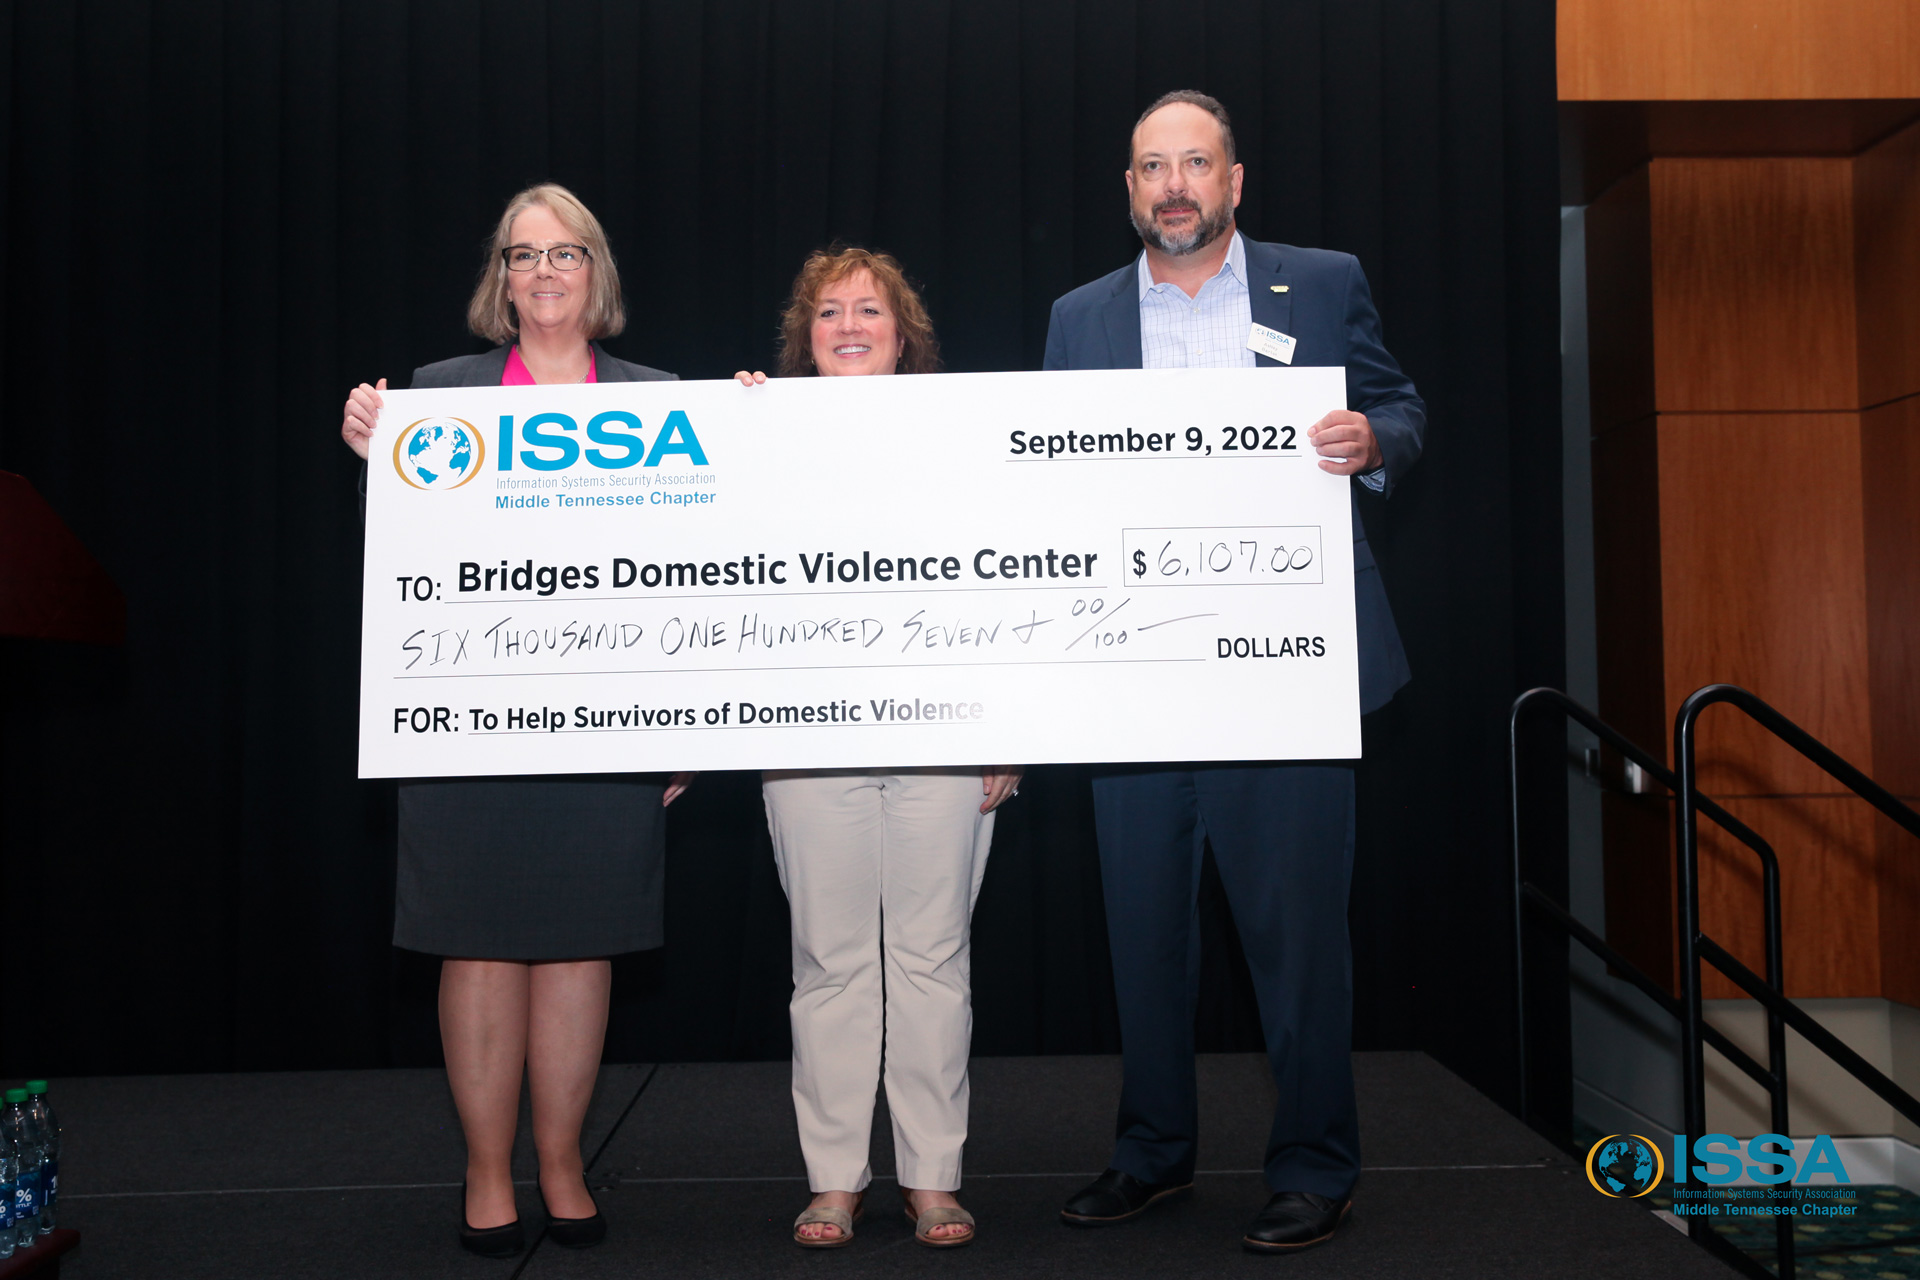 ISSA of Middle Tennessee presents a check to Bridges Domestic Violence Center